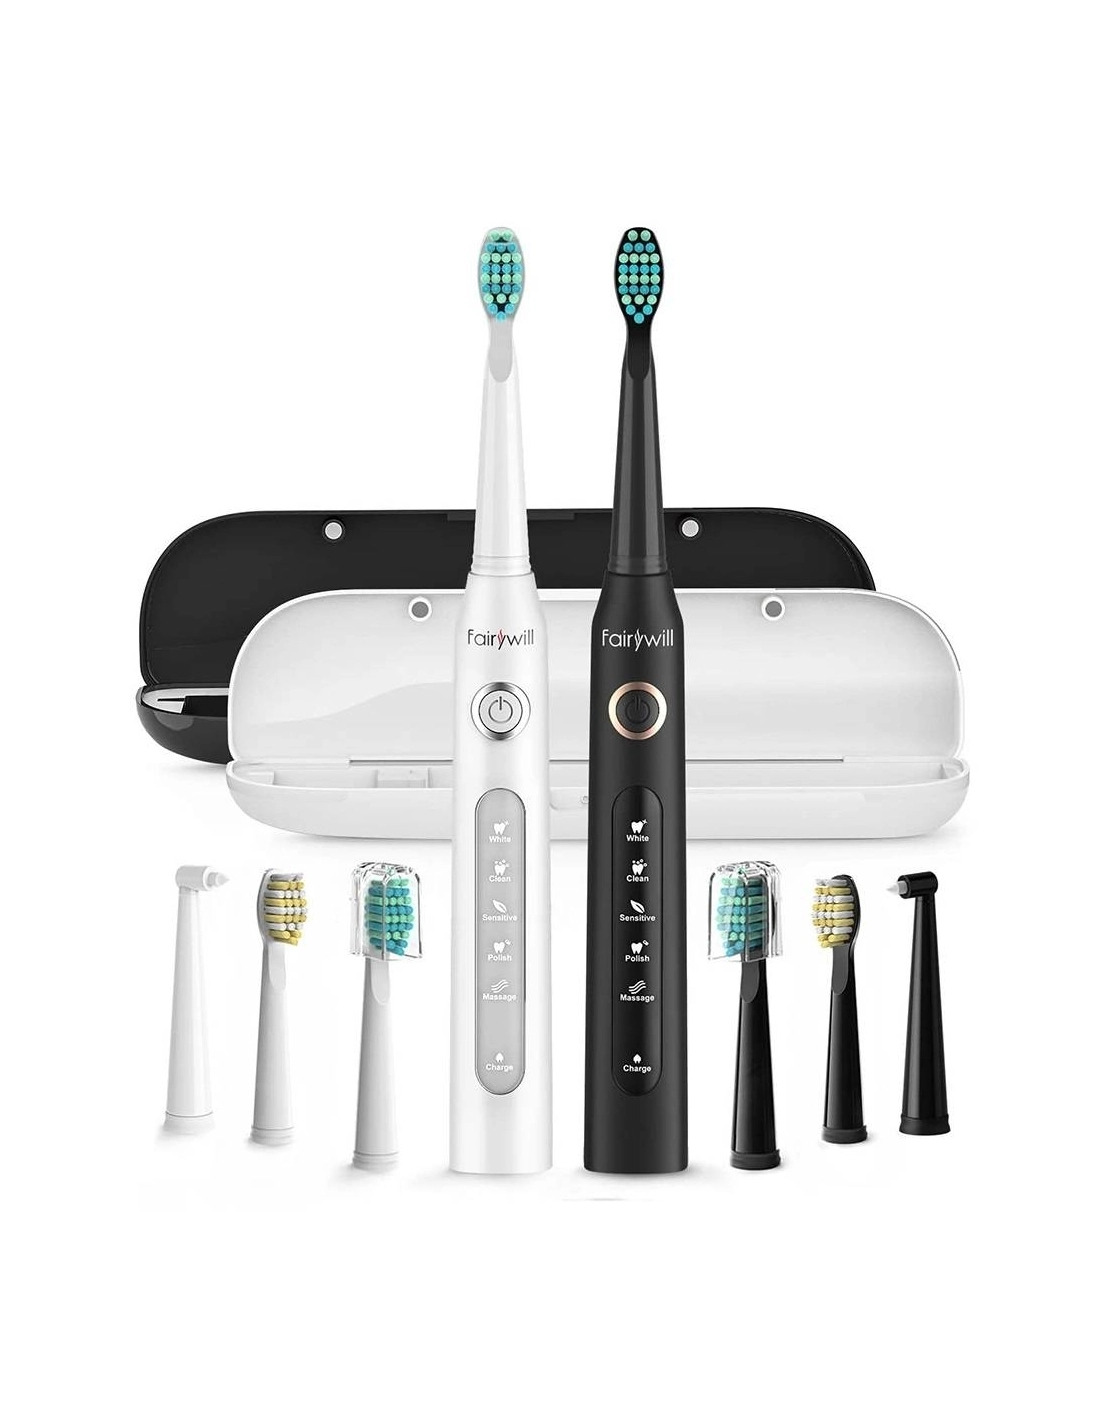 fairywill-sonic-toothbrushes-with-head-set-and-case-fw-507-black-and-white